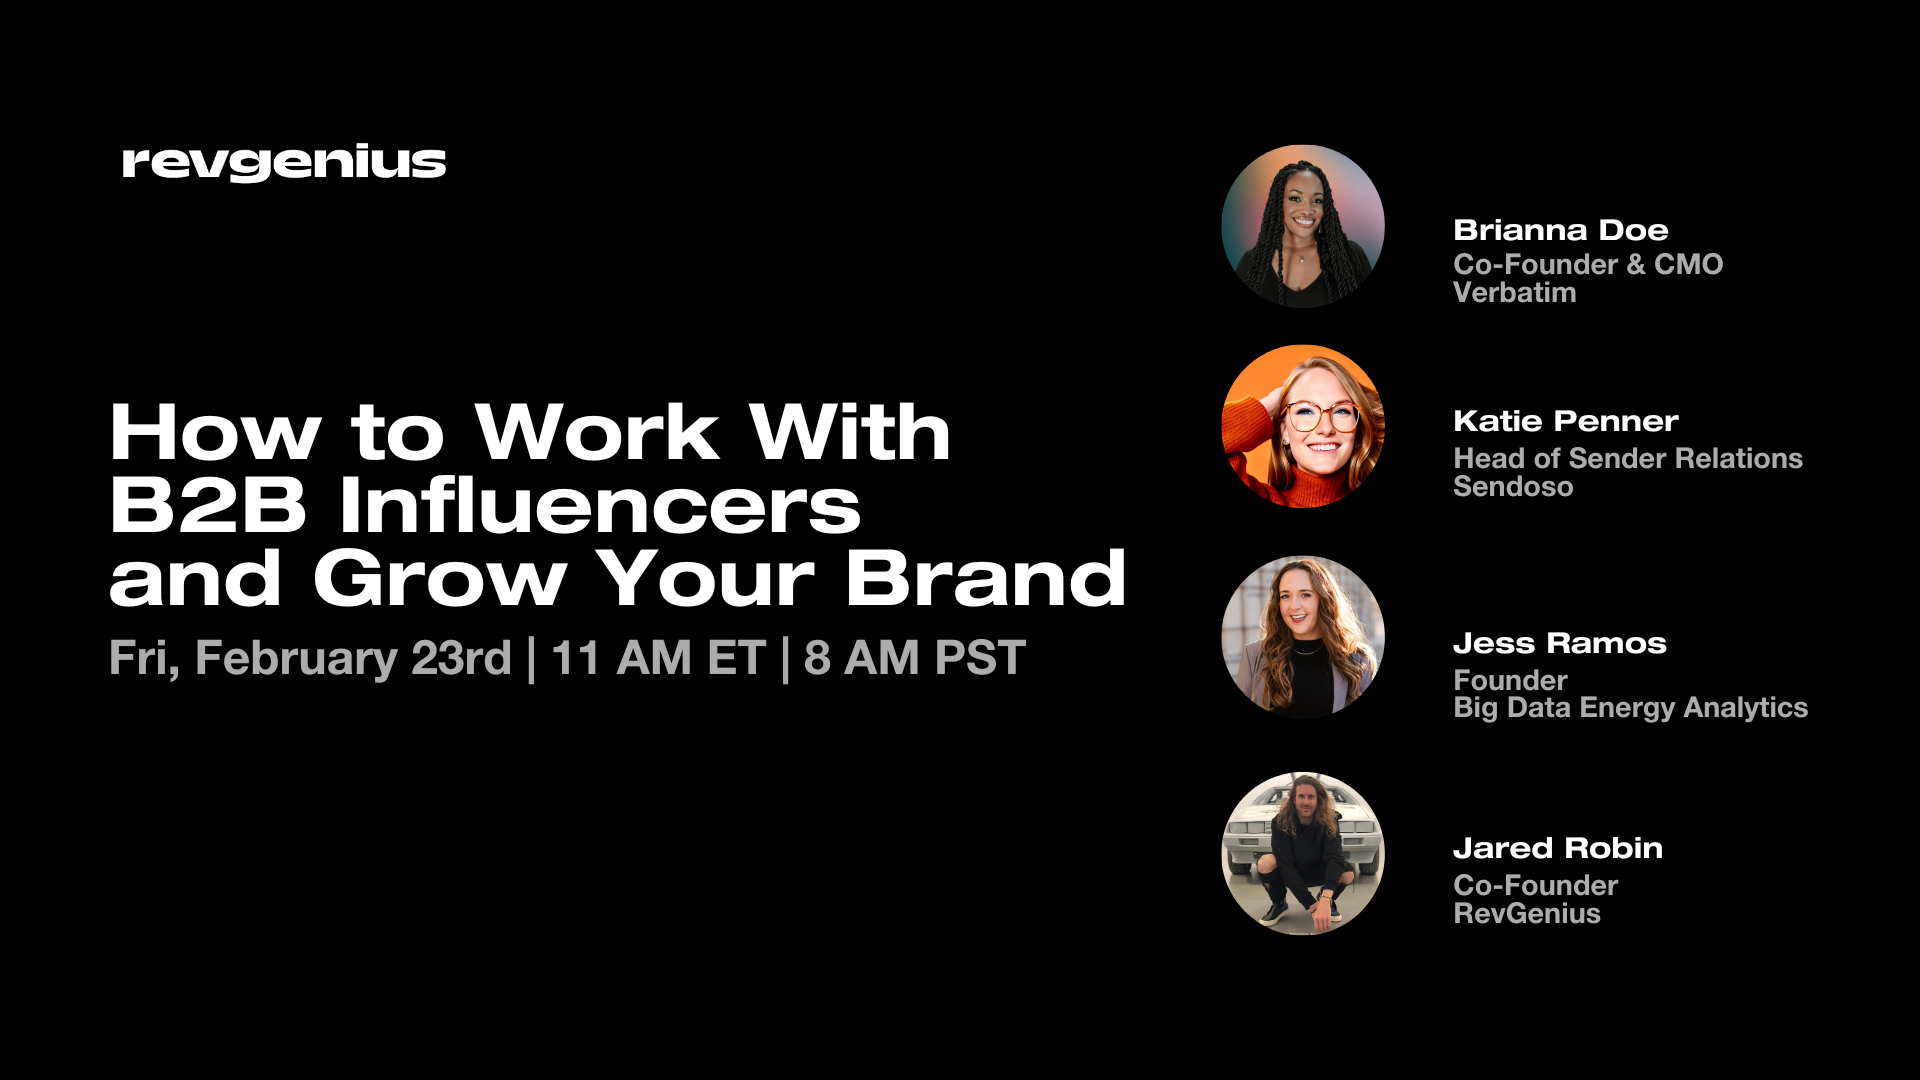 How to Work With B2B Influencers and Grow Your Brand